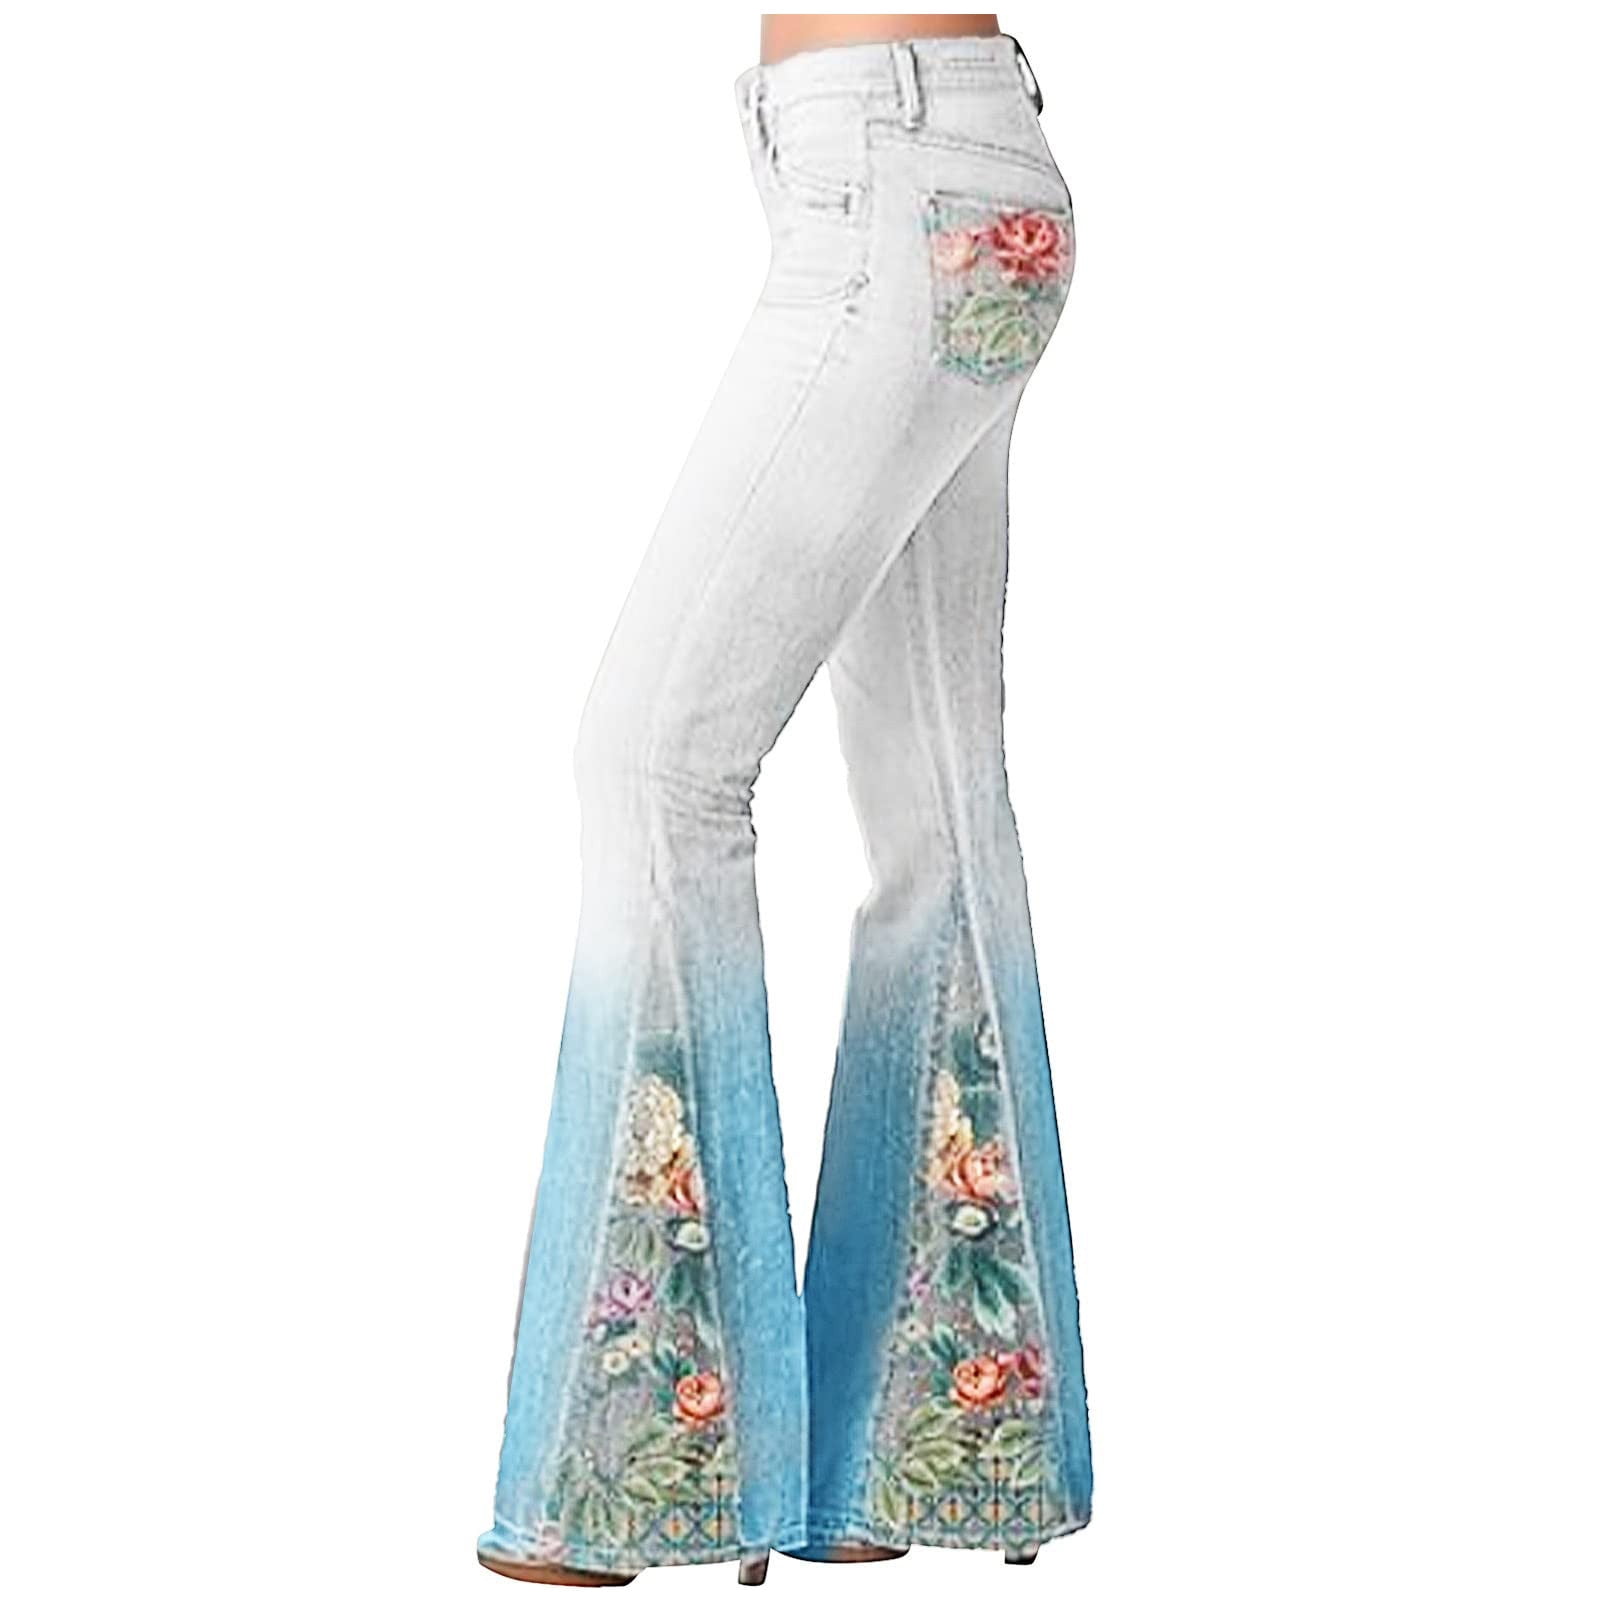 Gradient Flower Print Imitation Denim Bell Bottoms High Waist Long Pants  For Women Spring Fashion Plus Size Peacocks Ladies Trousers L1031 From  Sihuai03, $33.65